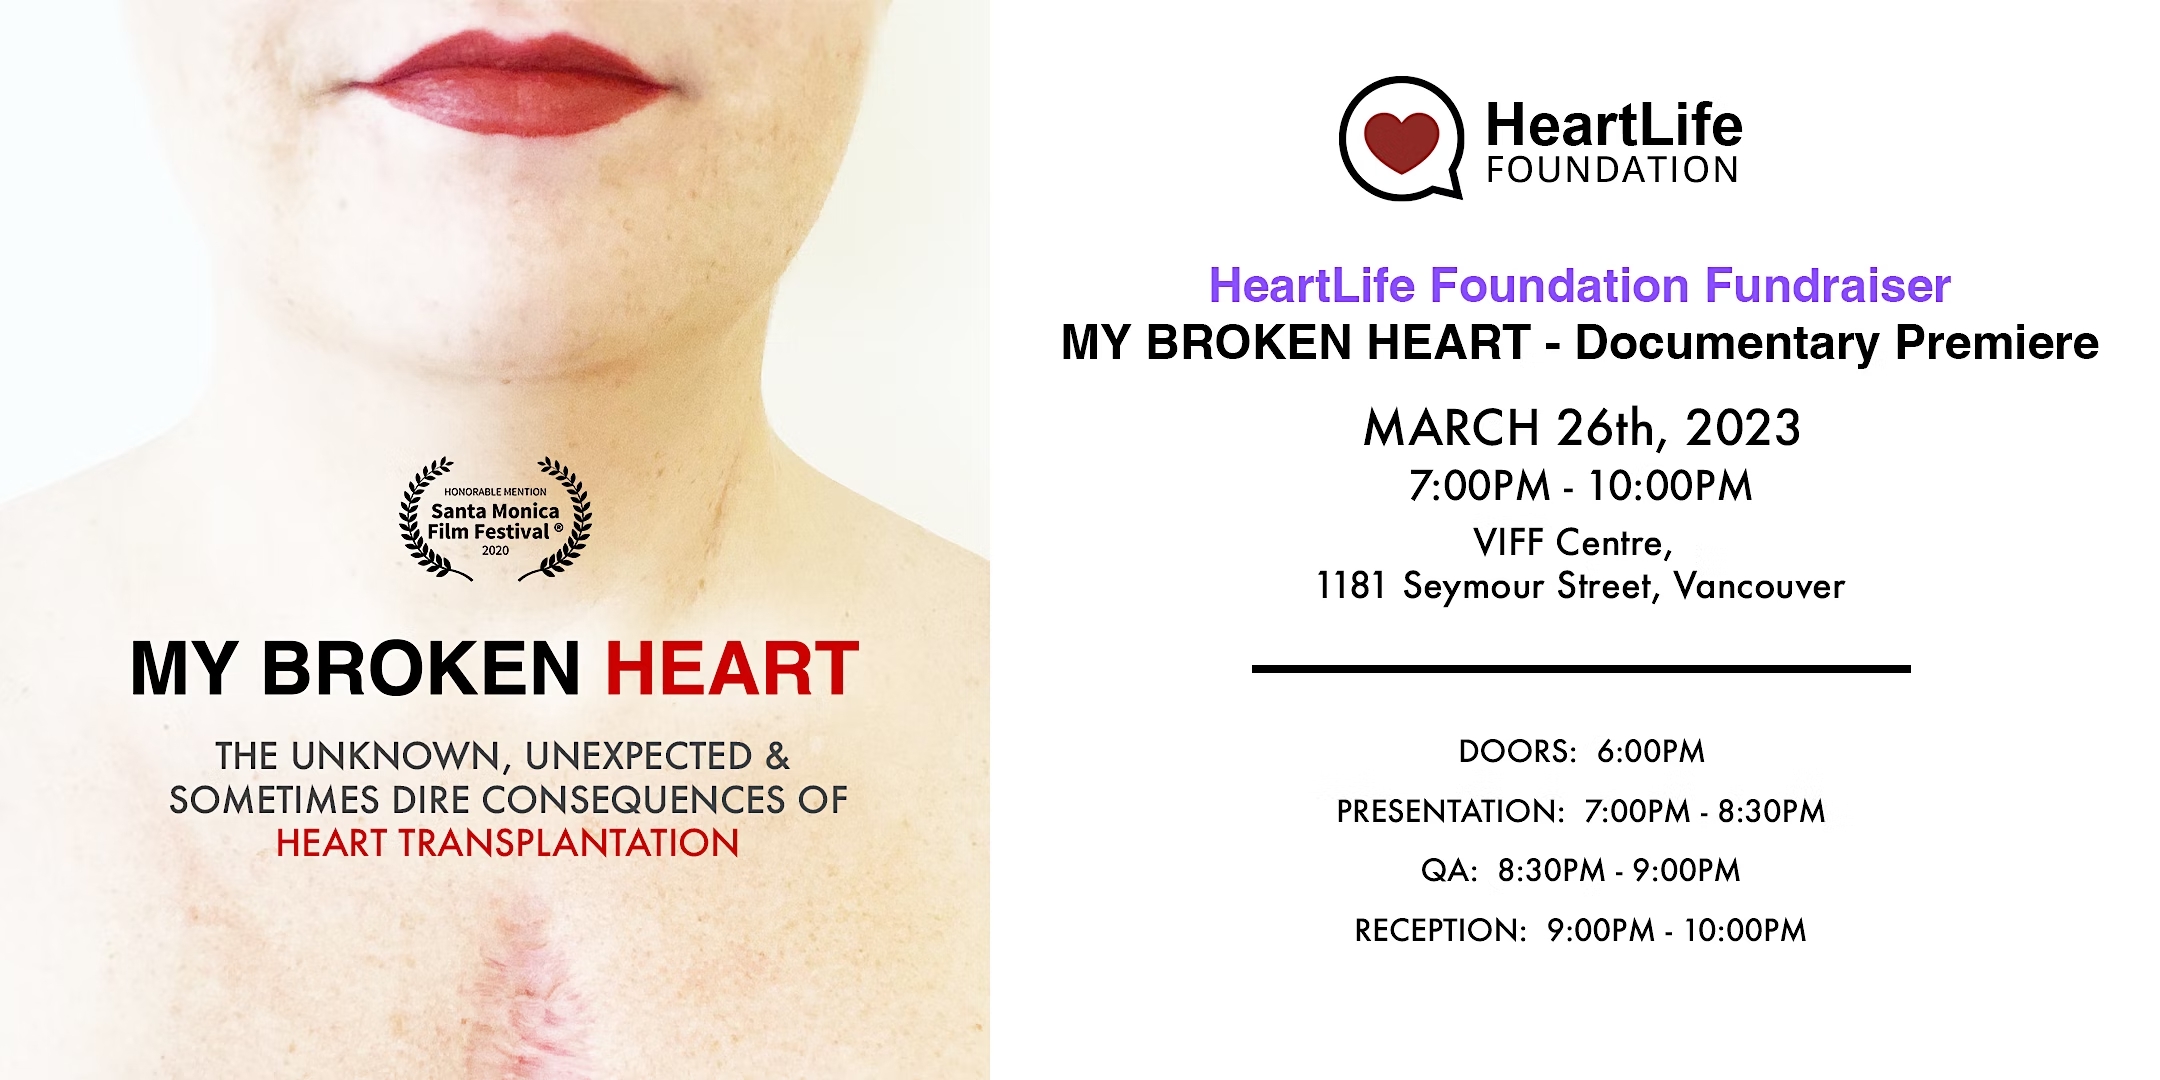 Announcement for My Broken Heart documentary premiere